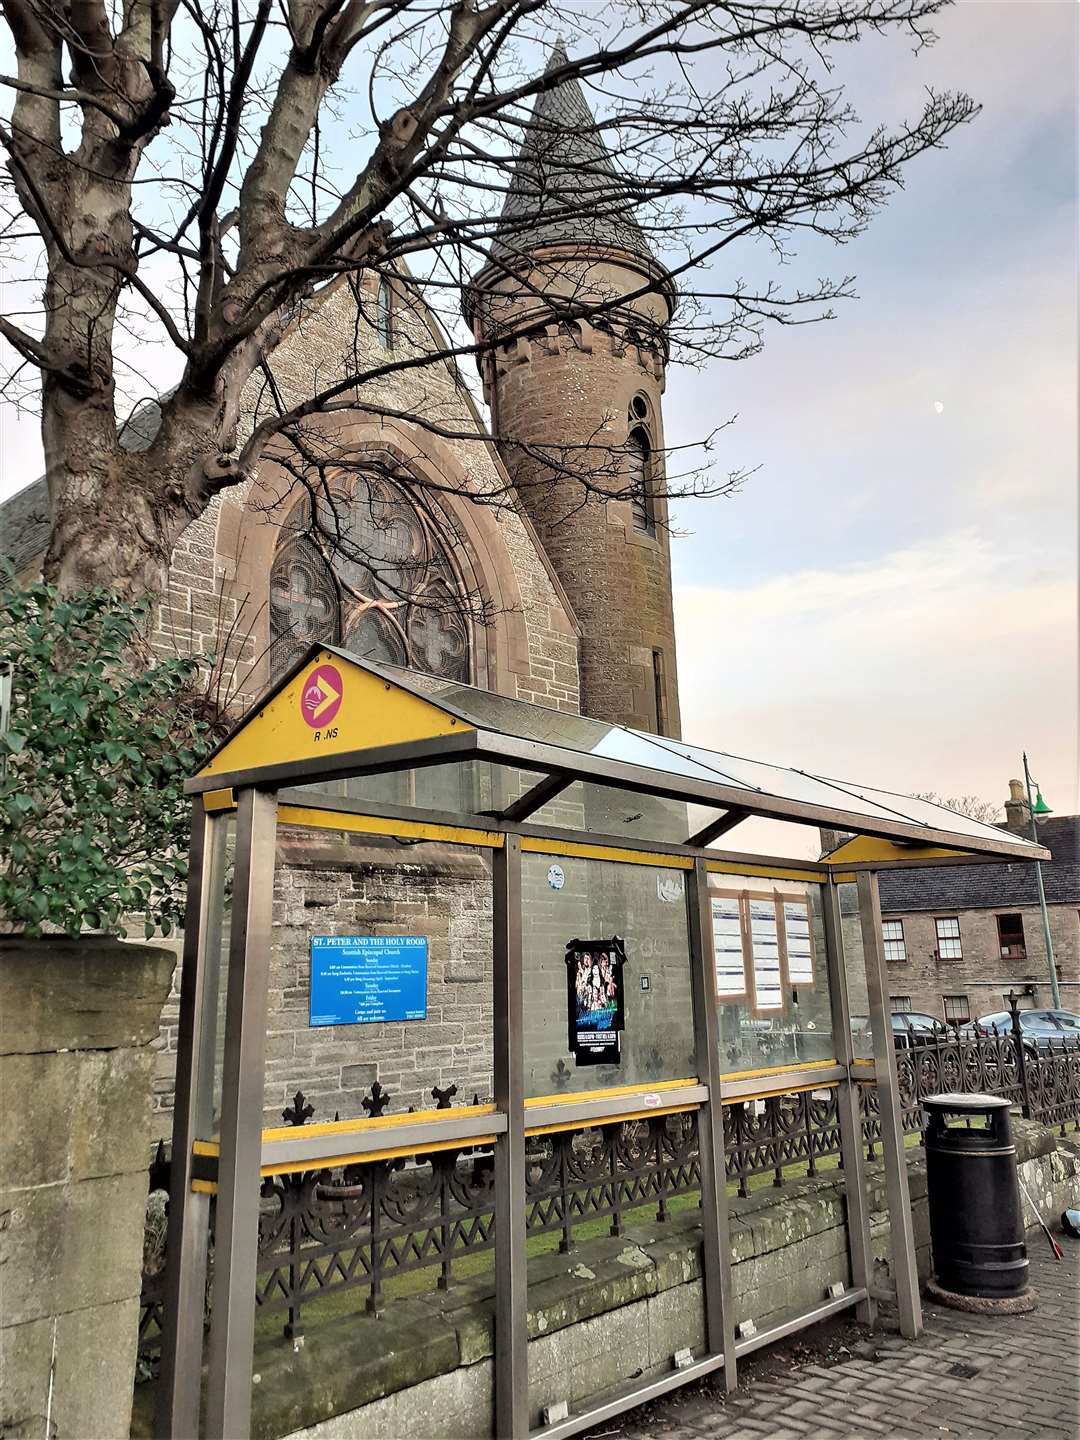 Sir George's Street bus stop is the main point for the Inverness bus. Mr Glasgow says it has 'peeling and tired paint, missing panels and litter frequently strewn into well-maintained garden of Gothic-style church'. Pictures: Alexander Glasgow